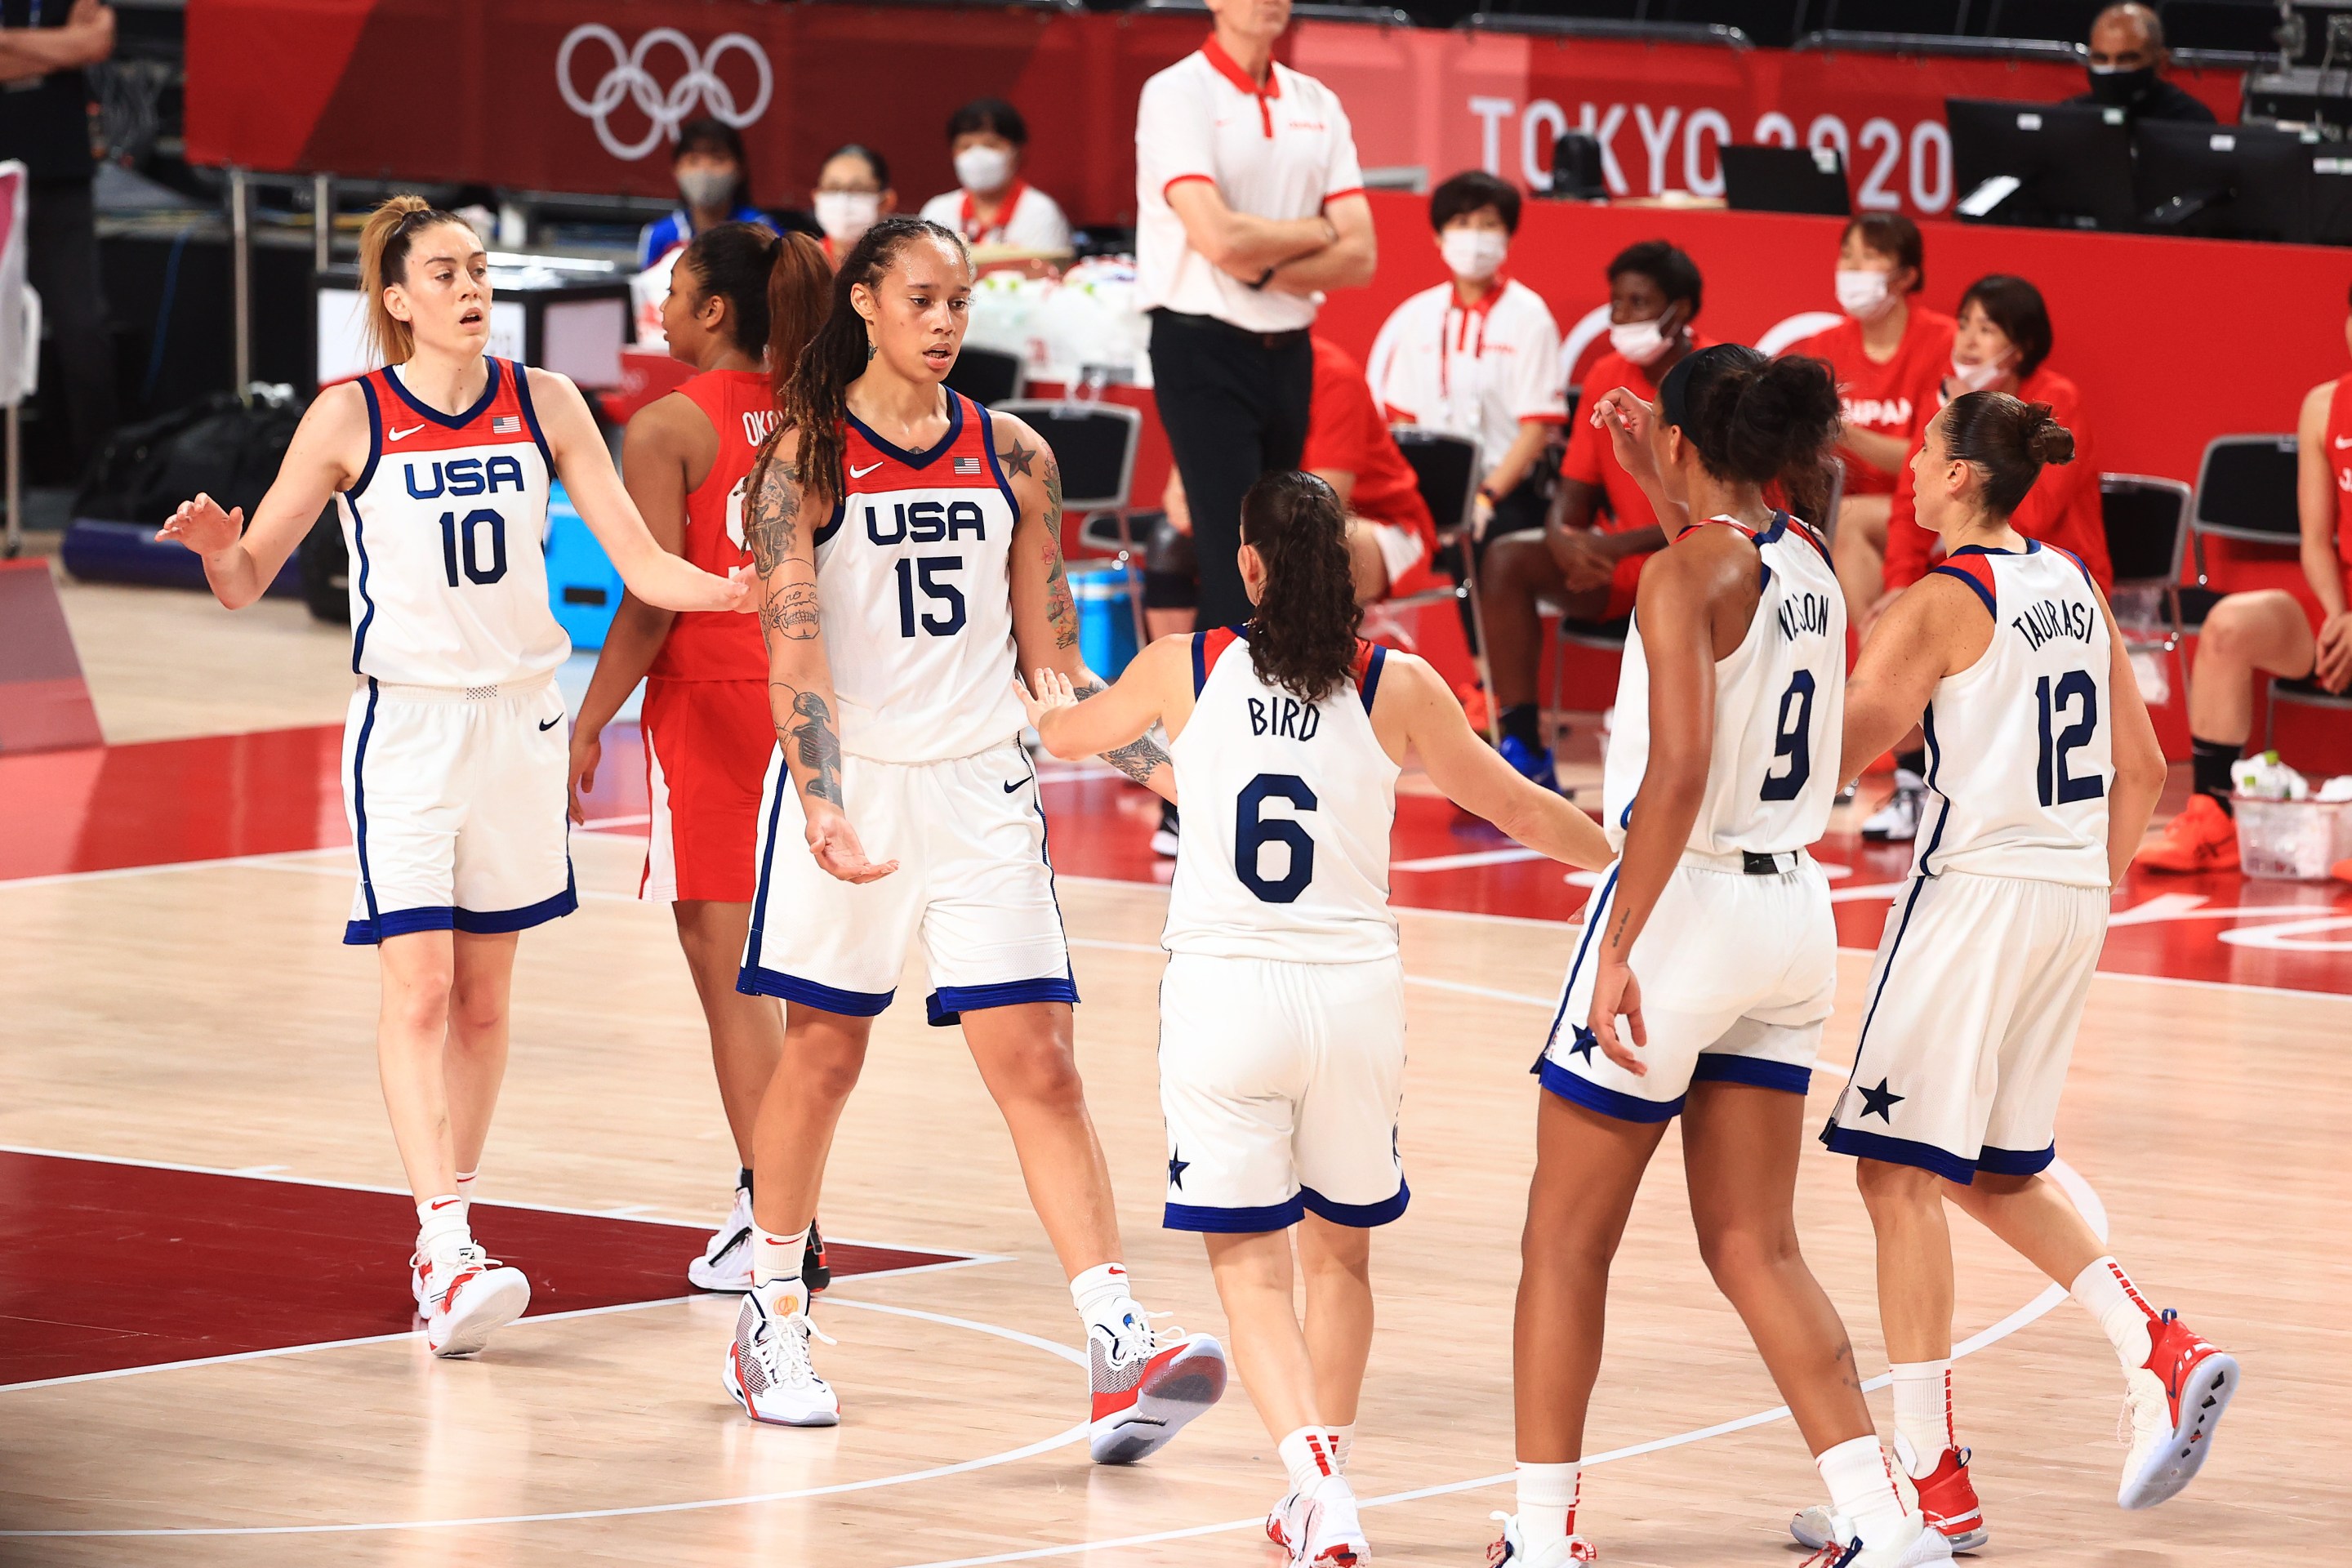 Team United States celebrates their lead against Team Japan in the Women's Basketball final game on day sixteen of the 2020 Tokyo Olympic games at Saitama Super Arena on August 08, 2021 in Saitama, Japan.